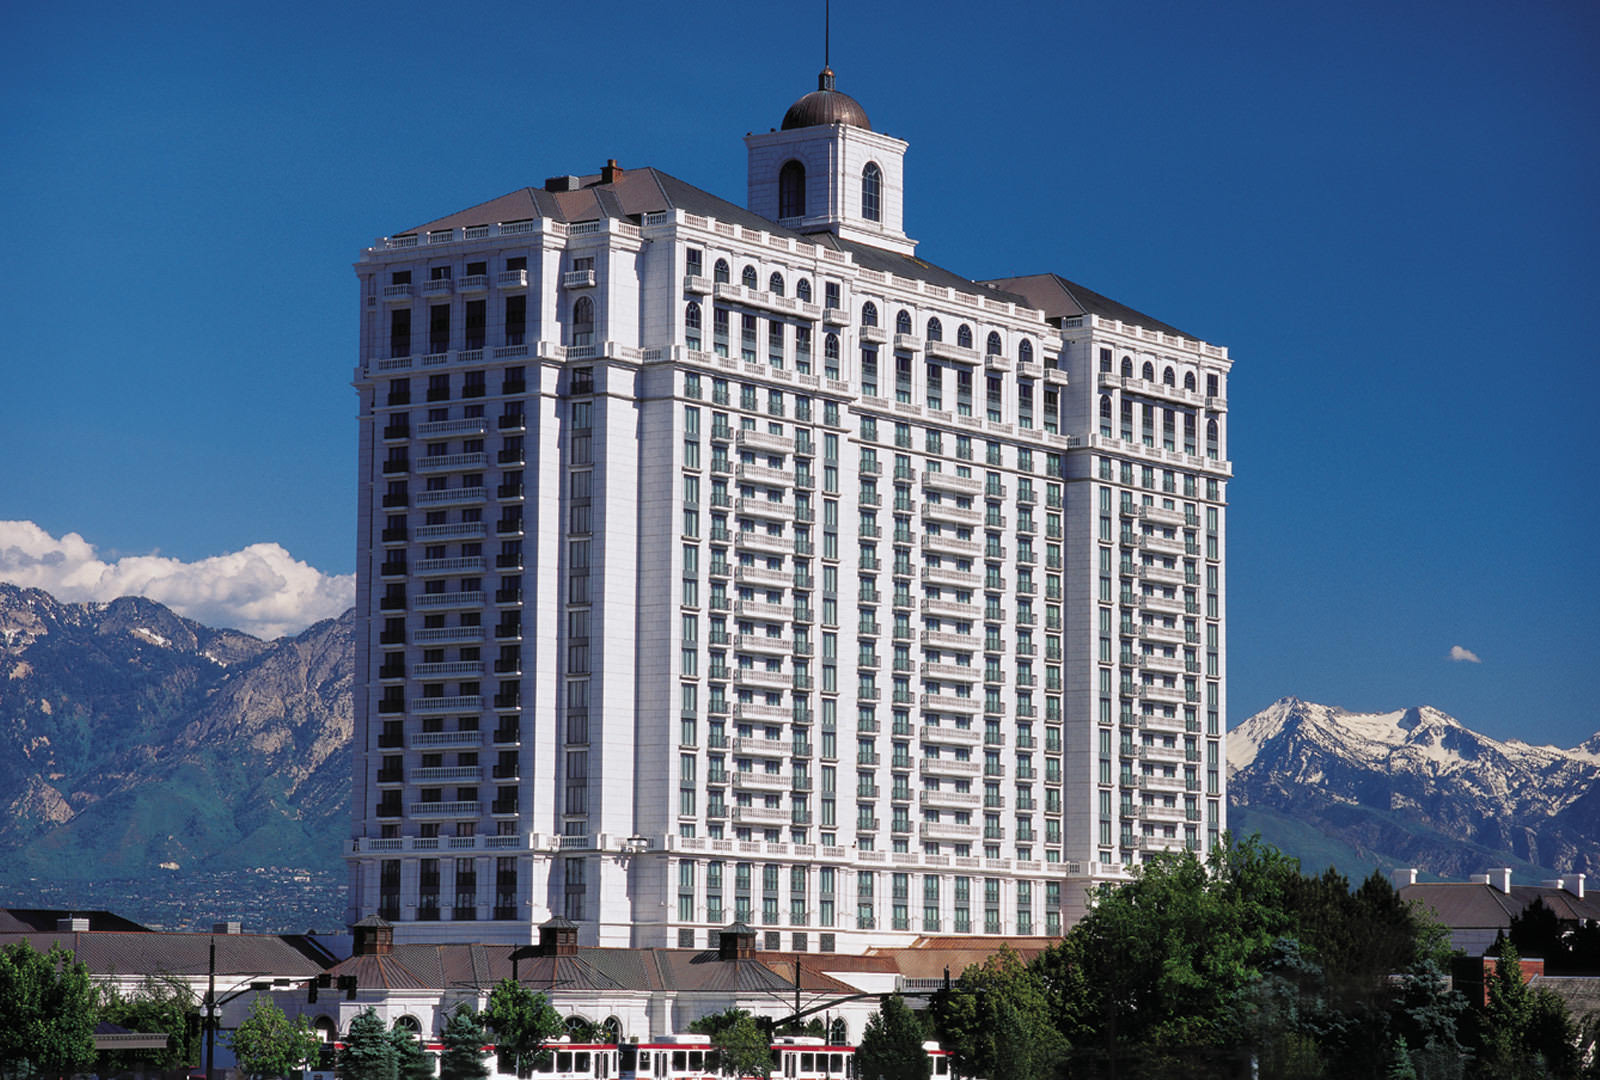 Grand America Hotel white granite exterior with mountains in the background